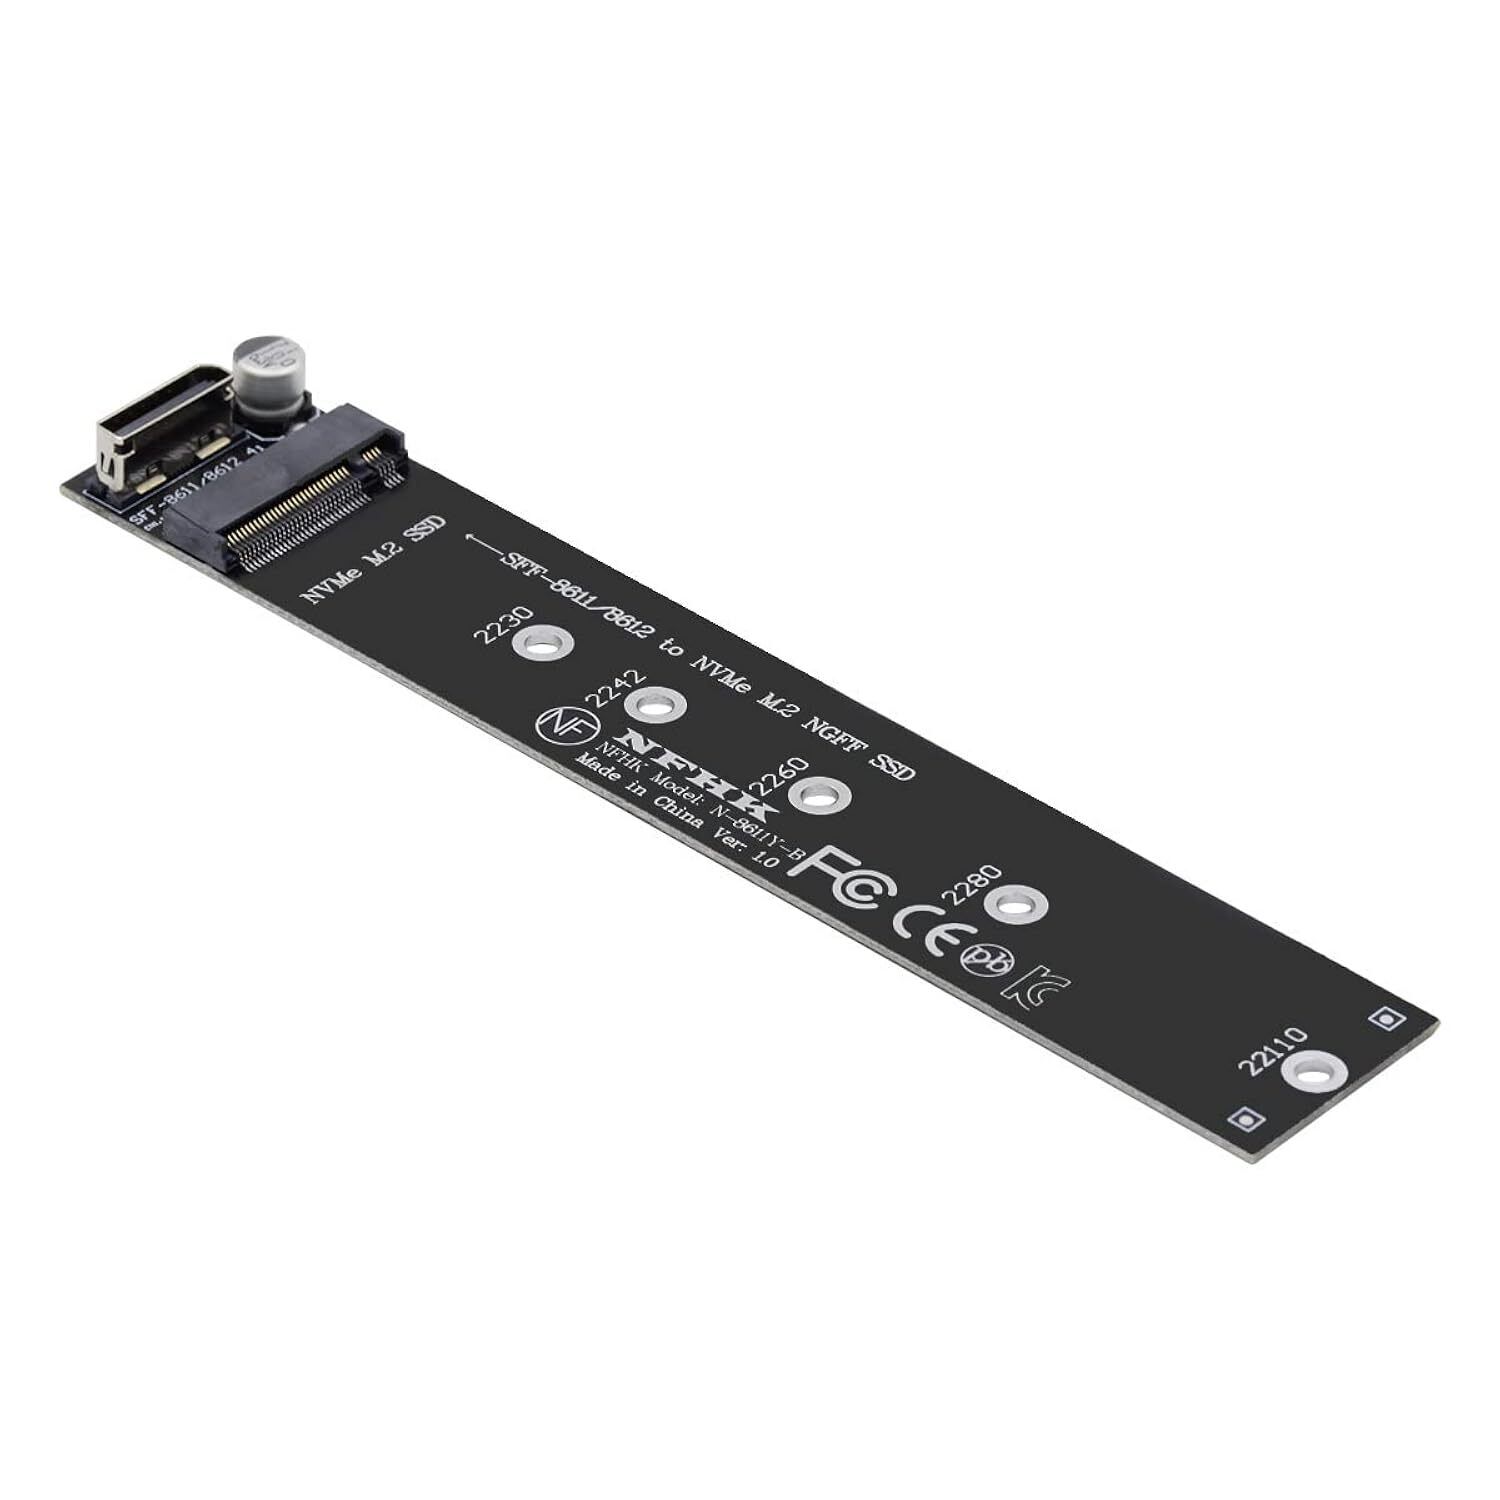 Cablecc Oculink SFF-8612 SFF-8611 to M.2 Kit NGFF M-Key to NVME PCIe SSD 2280